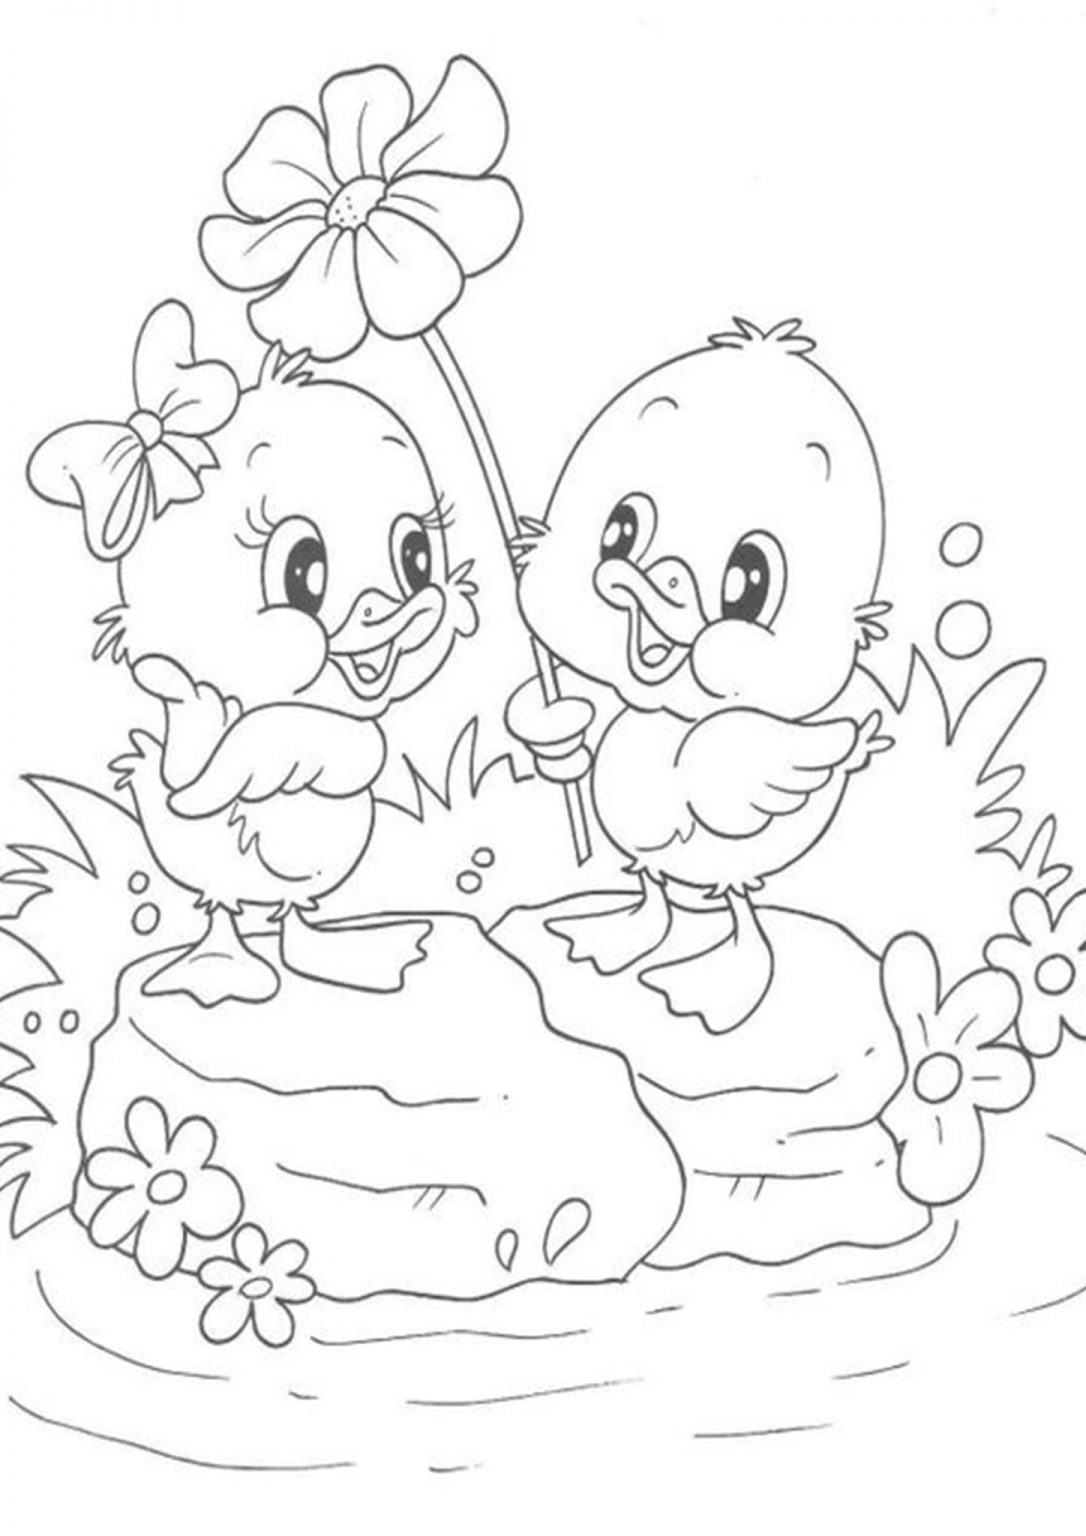 Easy Baby Animal Coloring Pages